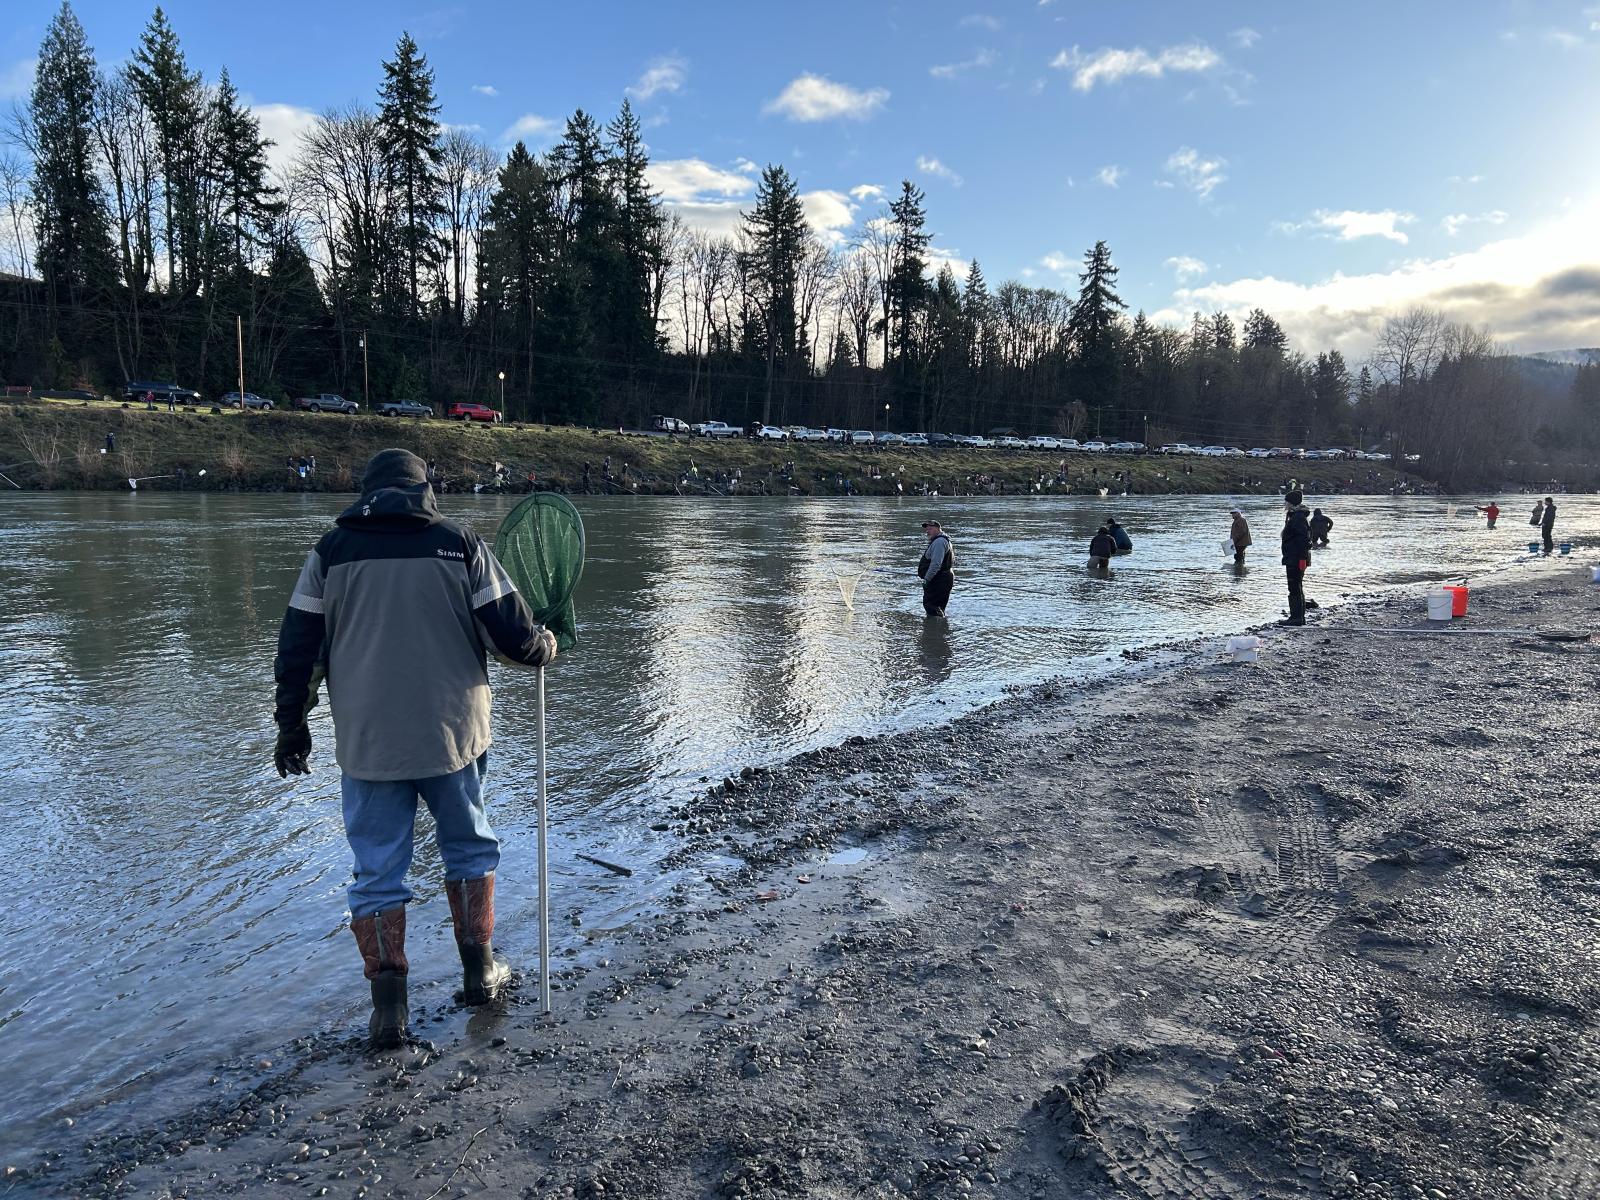 Harvesters dip net for smelt in the Cowlitz River.